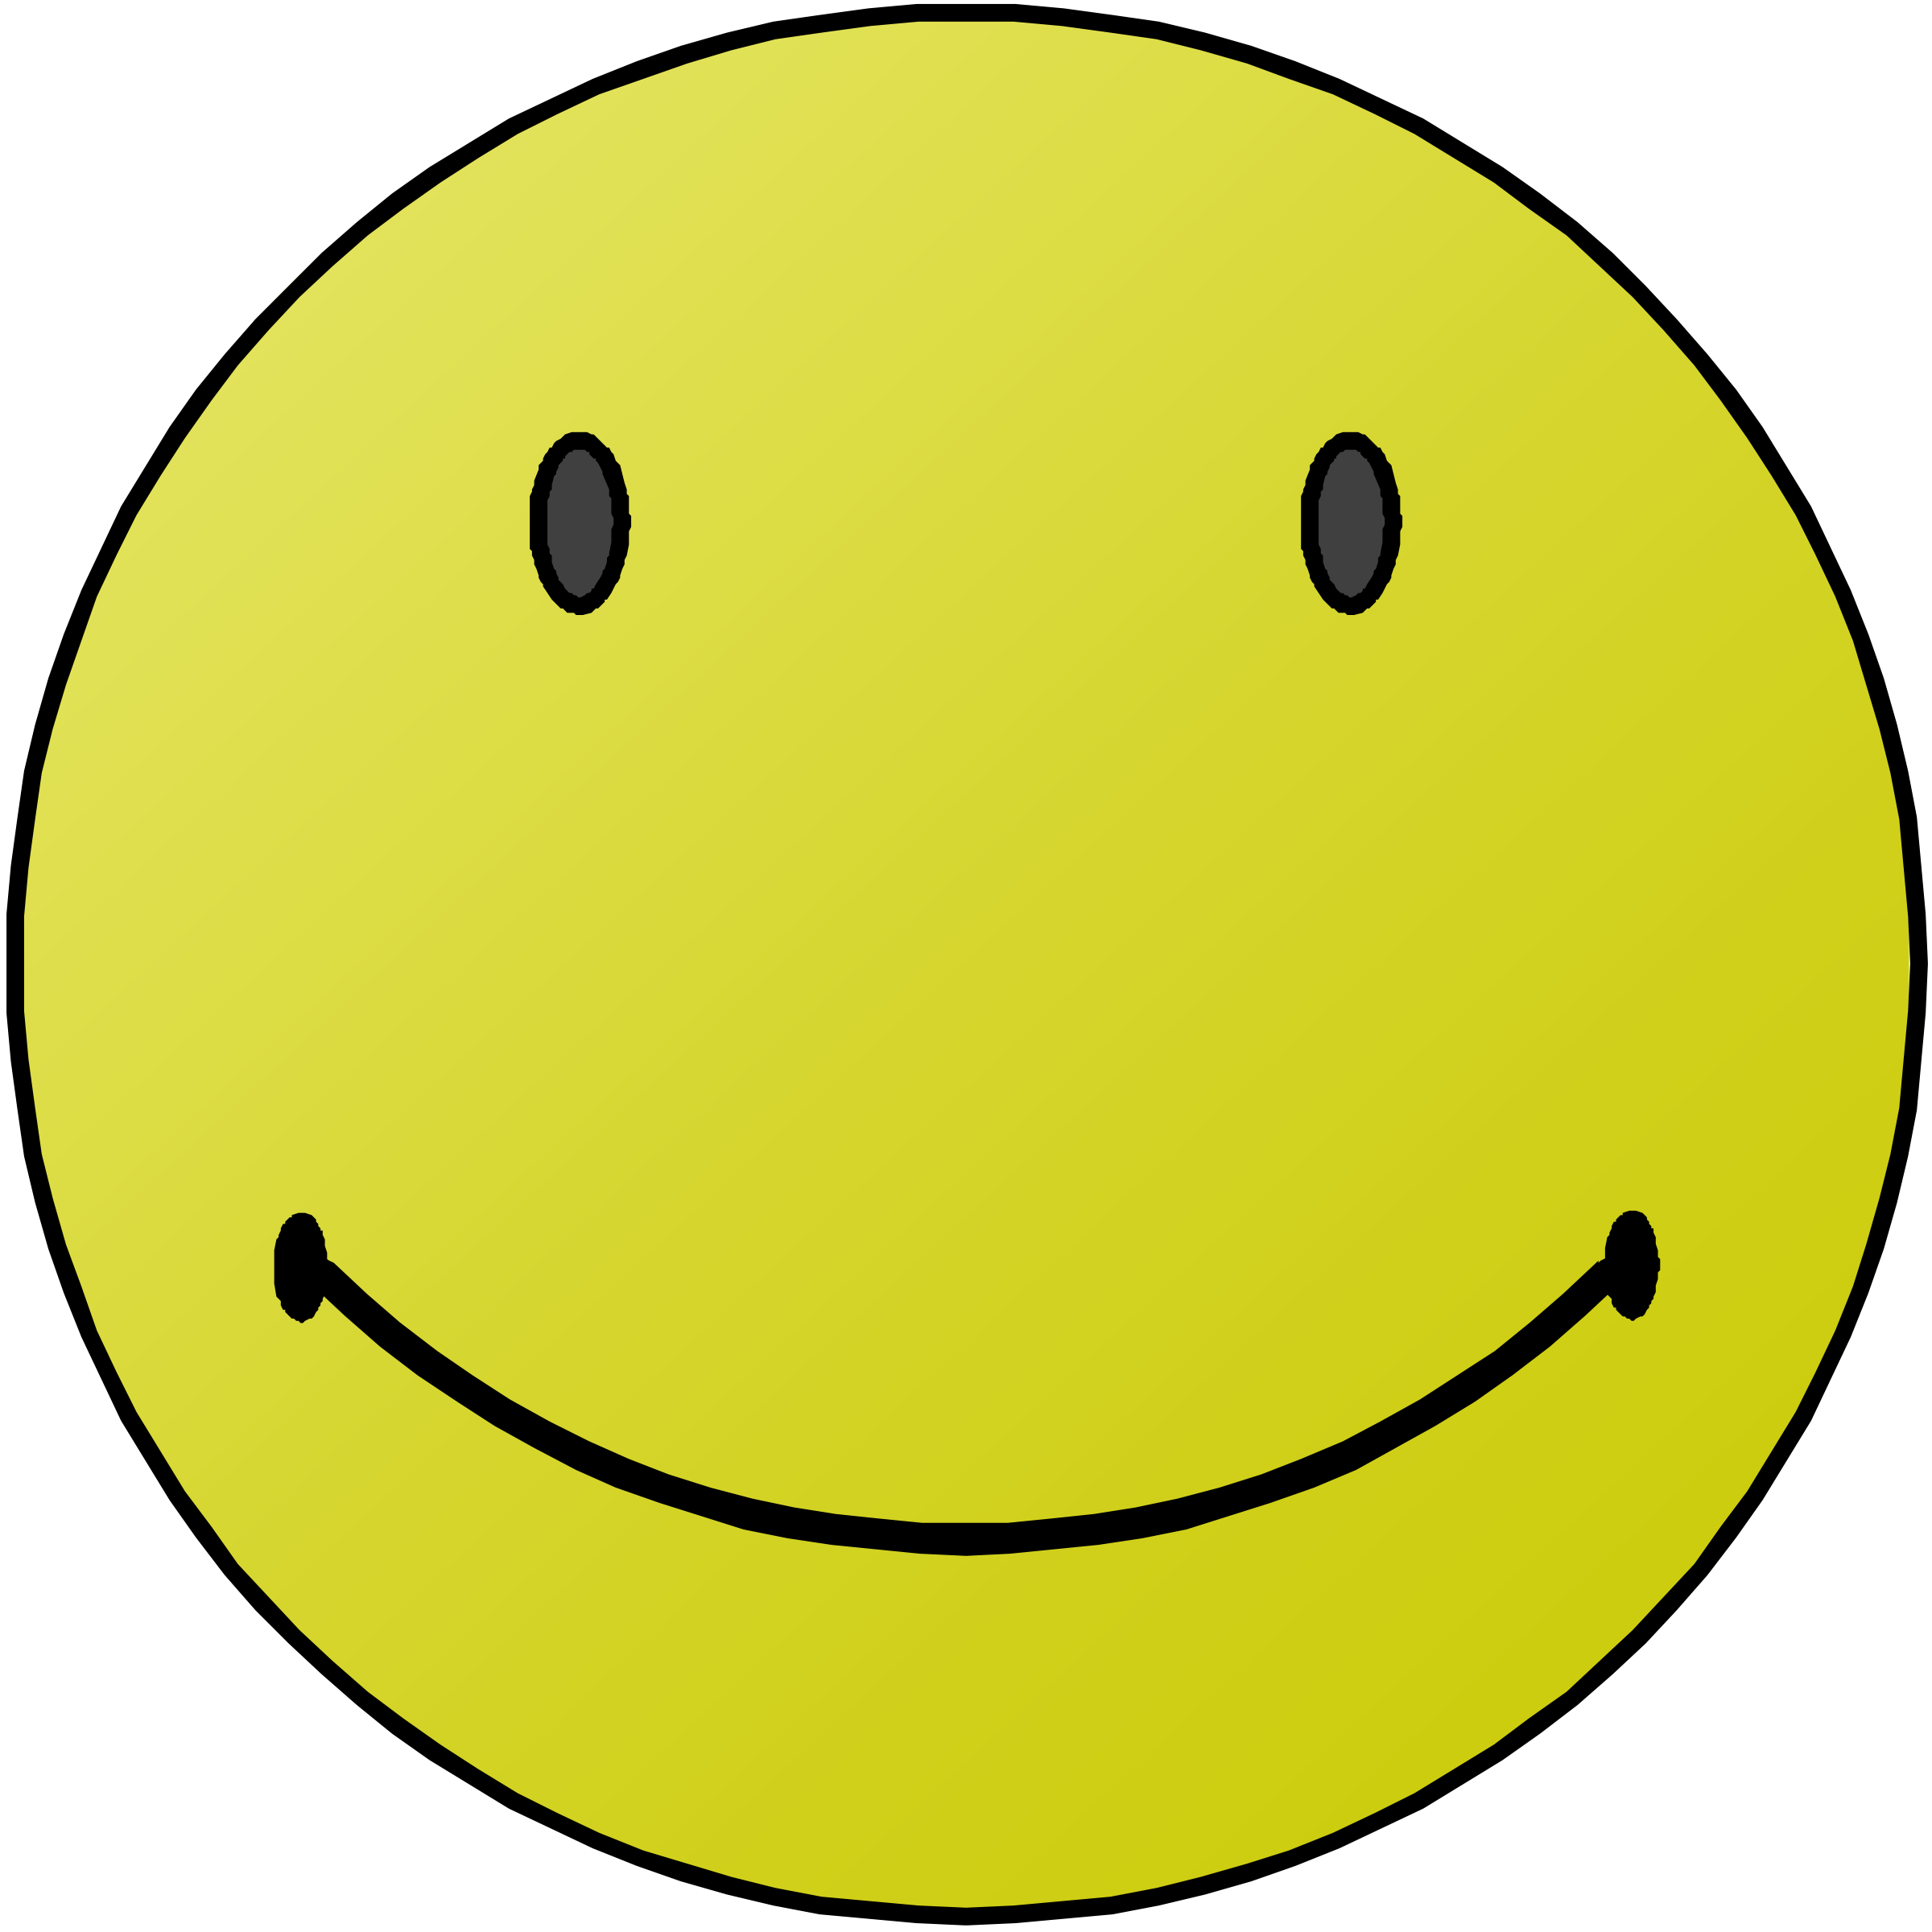 Happy Crying Smiley Face Free Cliparts That You Can Download To You